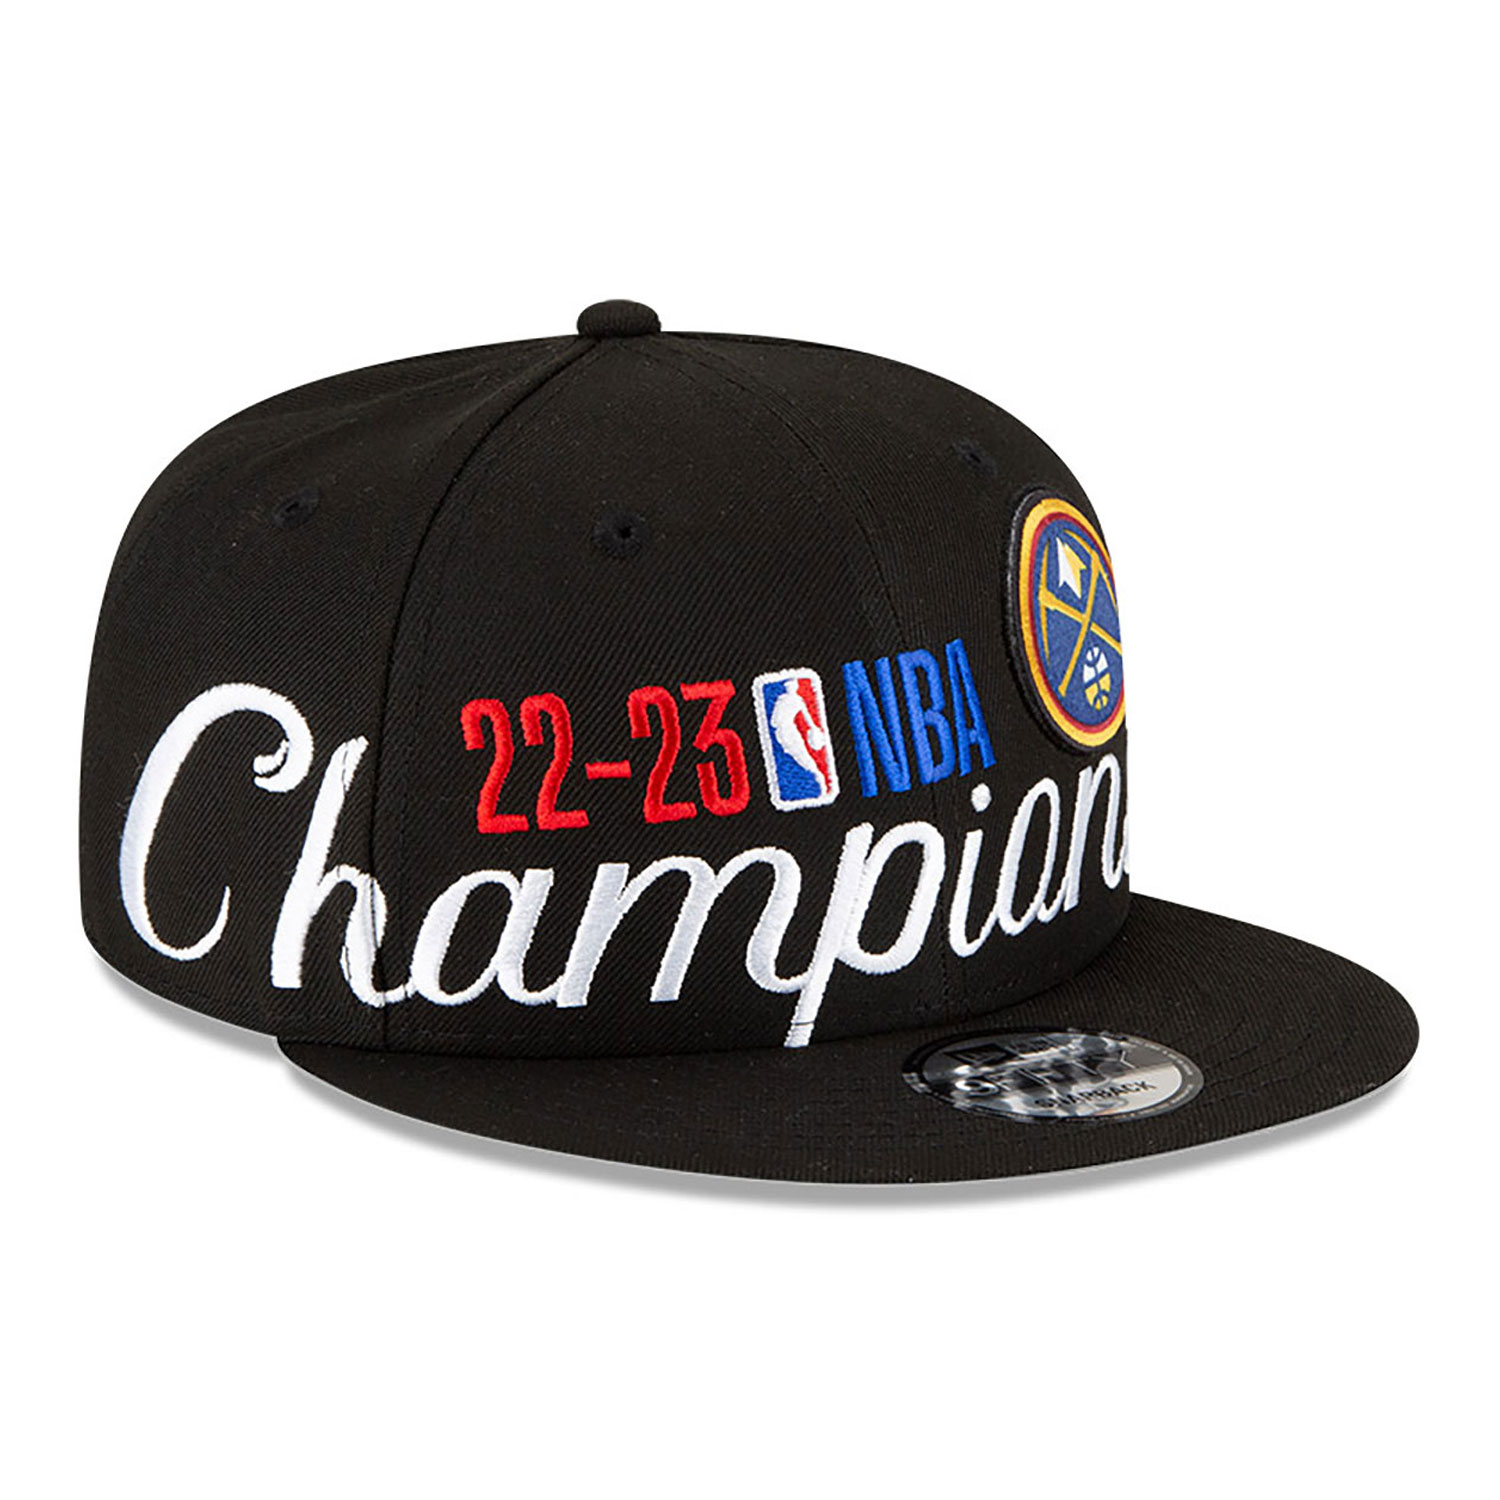 Warriors 2022 NBA Champions hats and shirts are already available